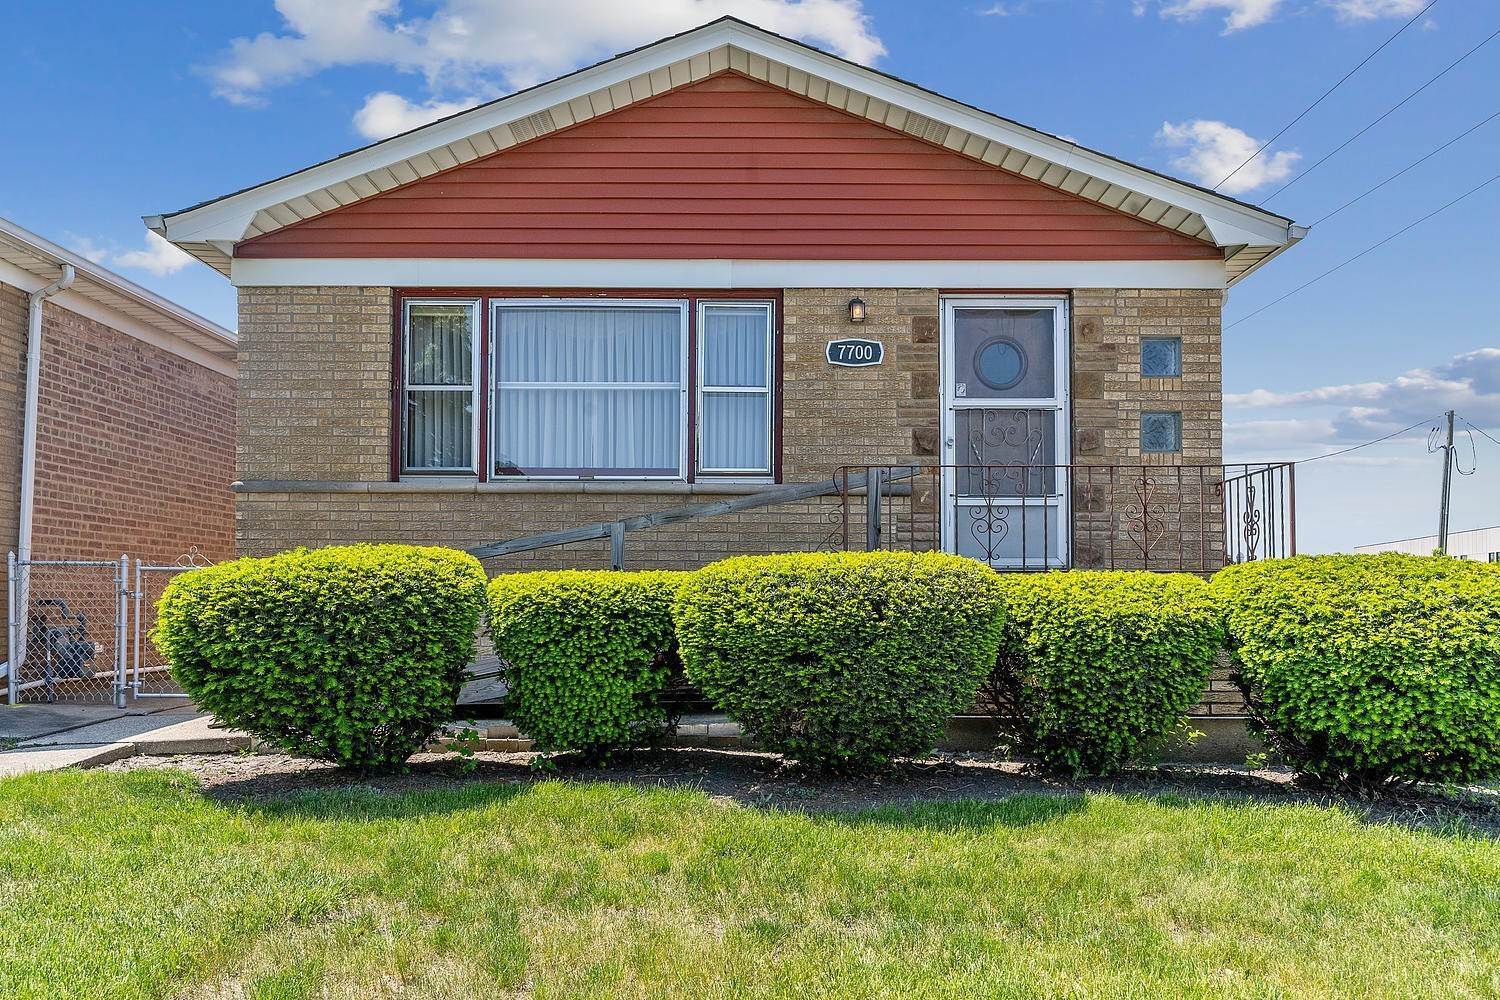 Single Family for Sale at Burbank, IL 60459